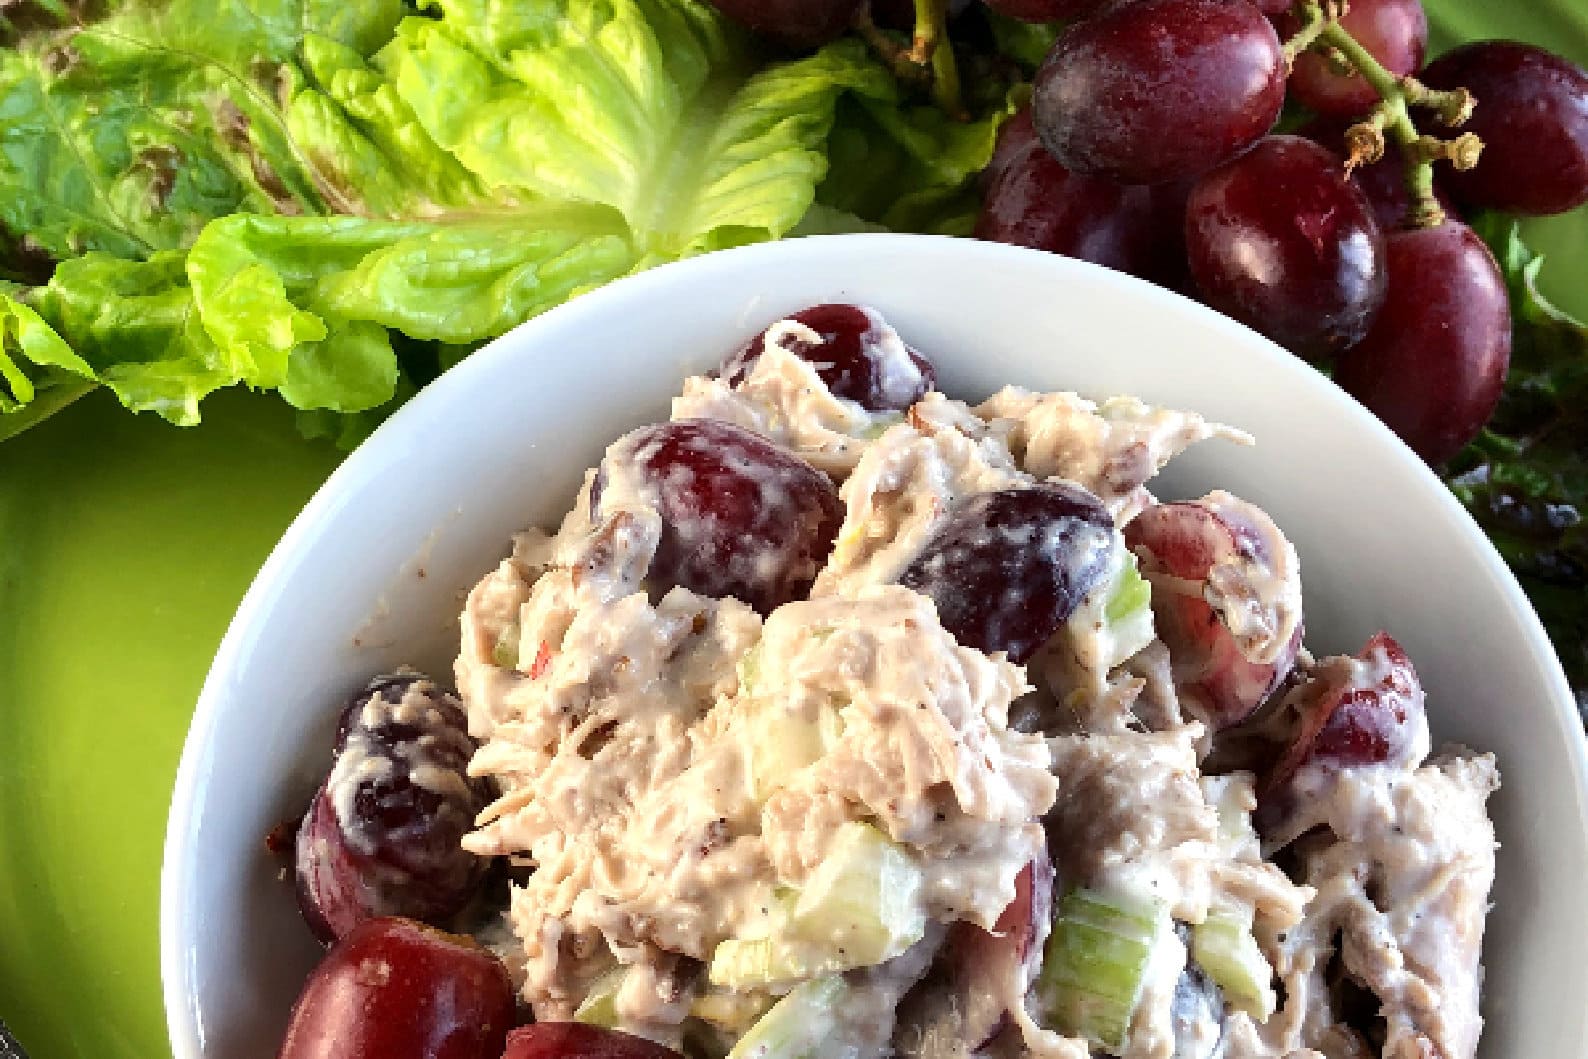 Chicken salad with red grapes and walnuts in a bowl